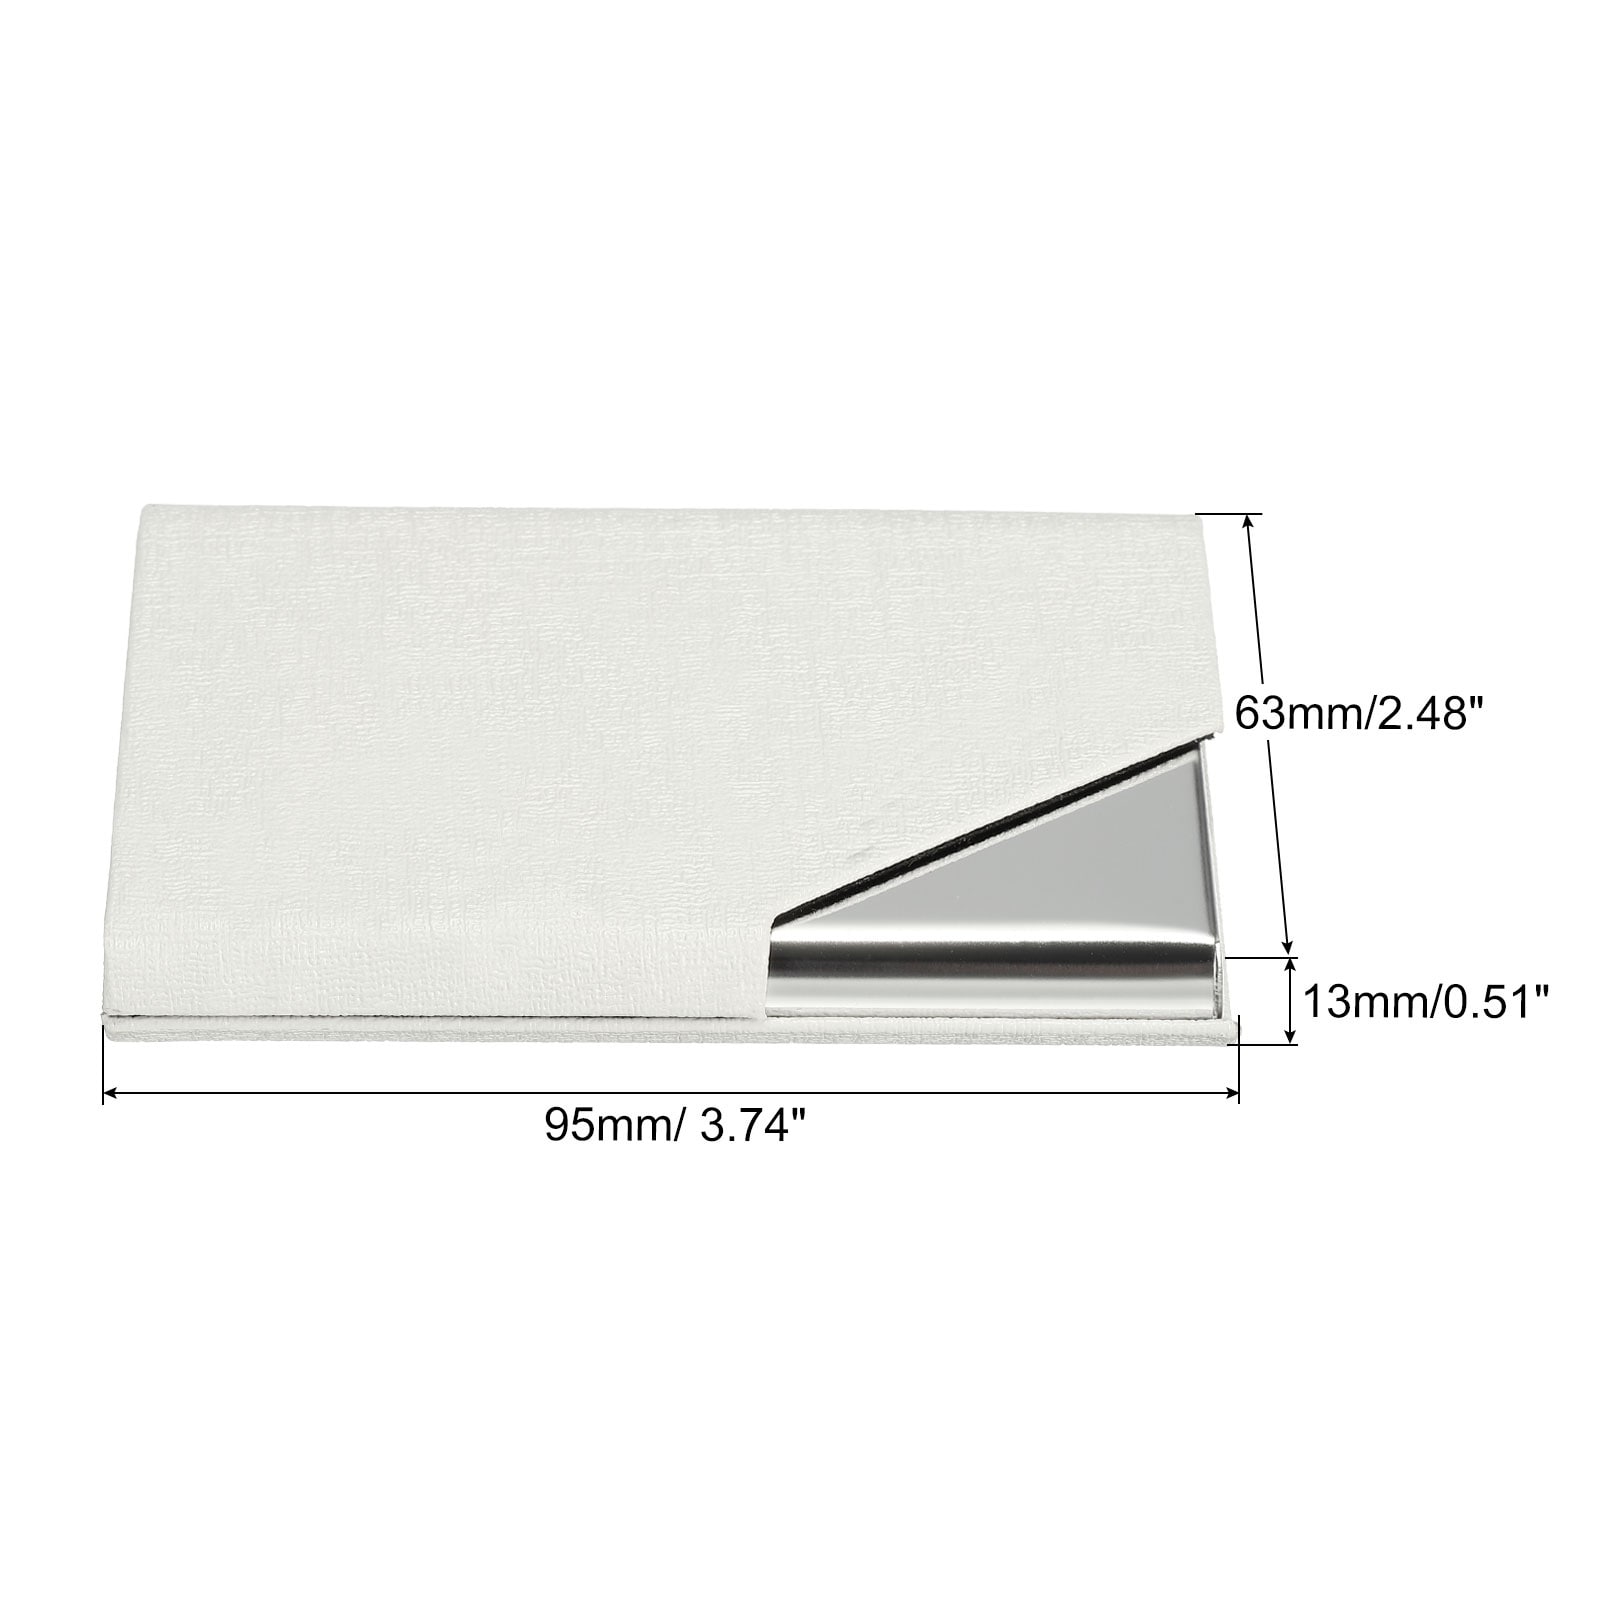 3.7x2.4x0.5 Inch Business Card Holder PU Leather Cover Name Cards 